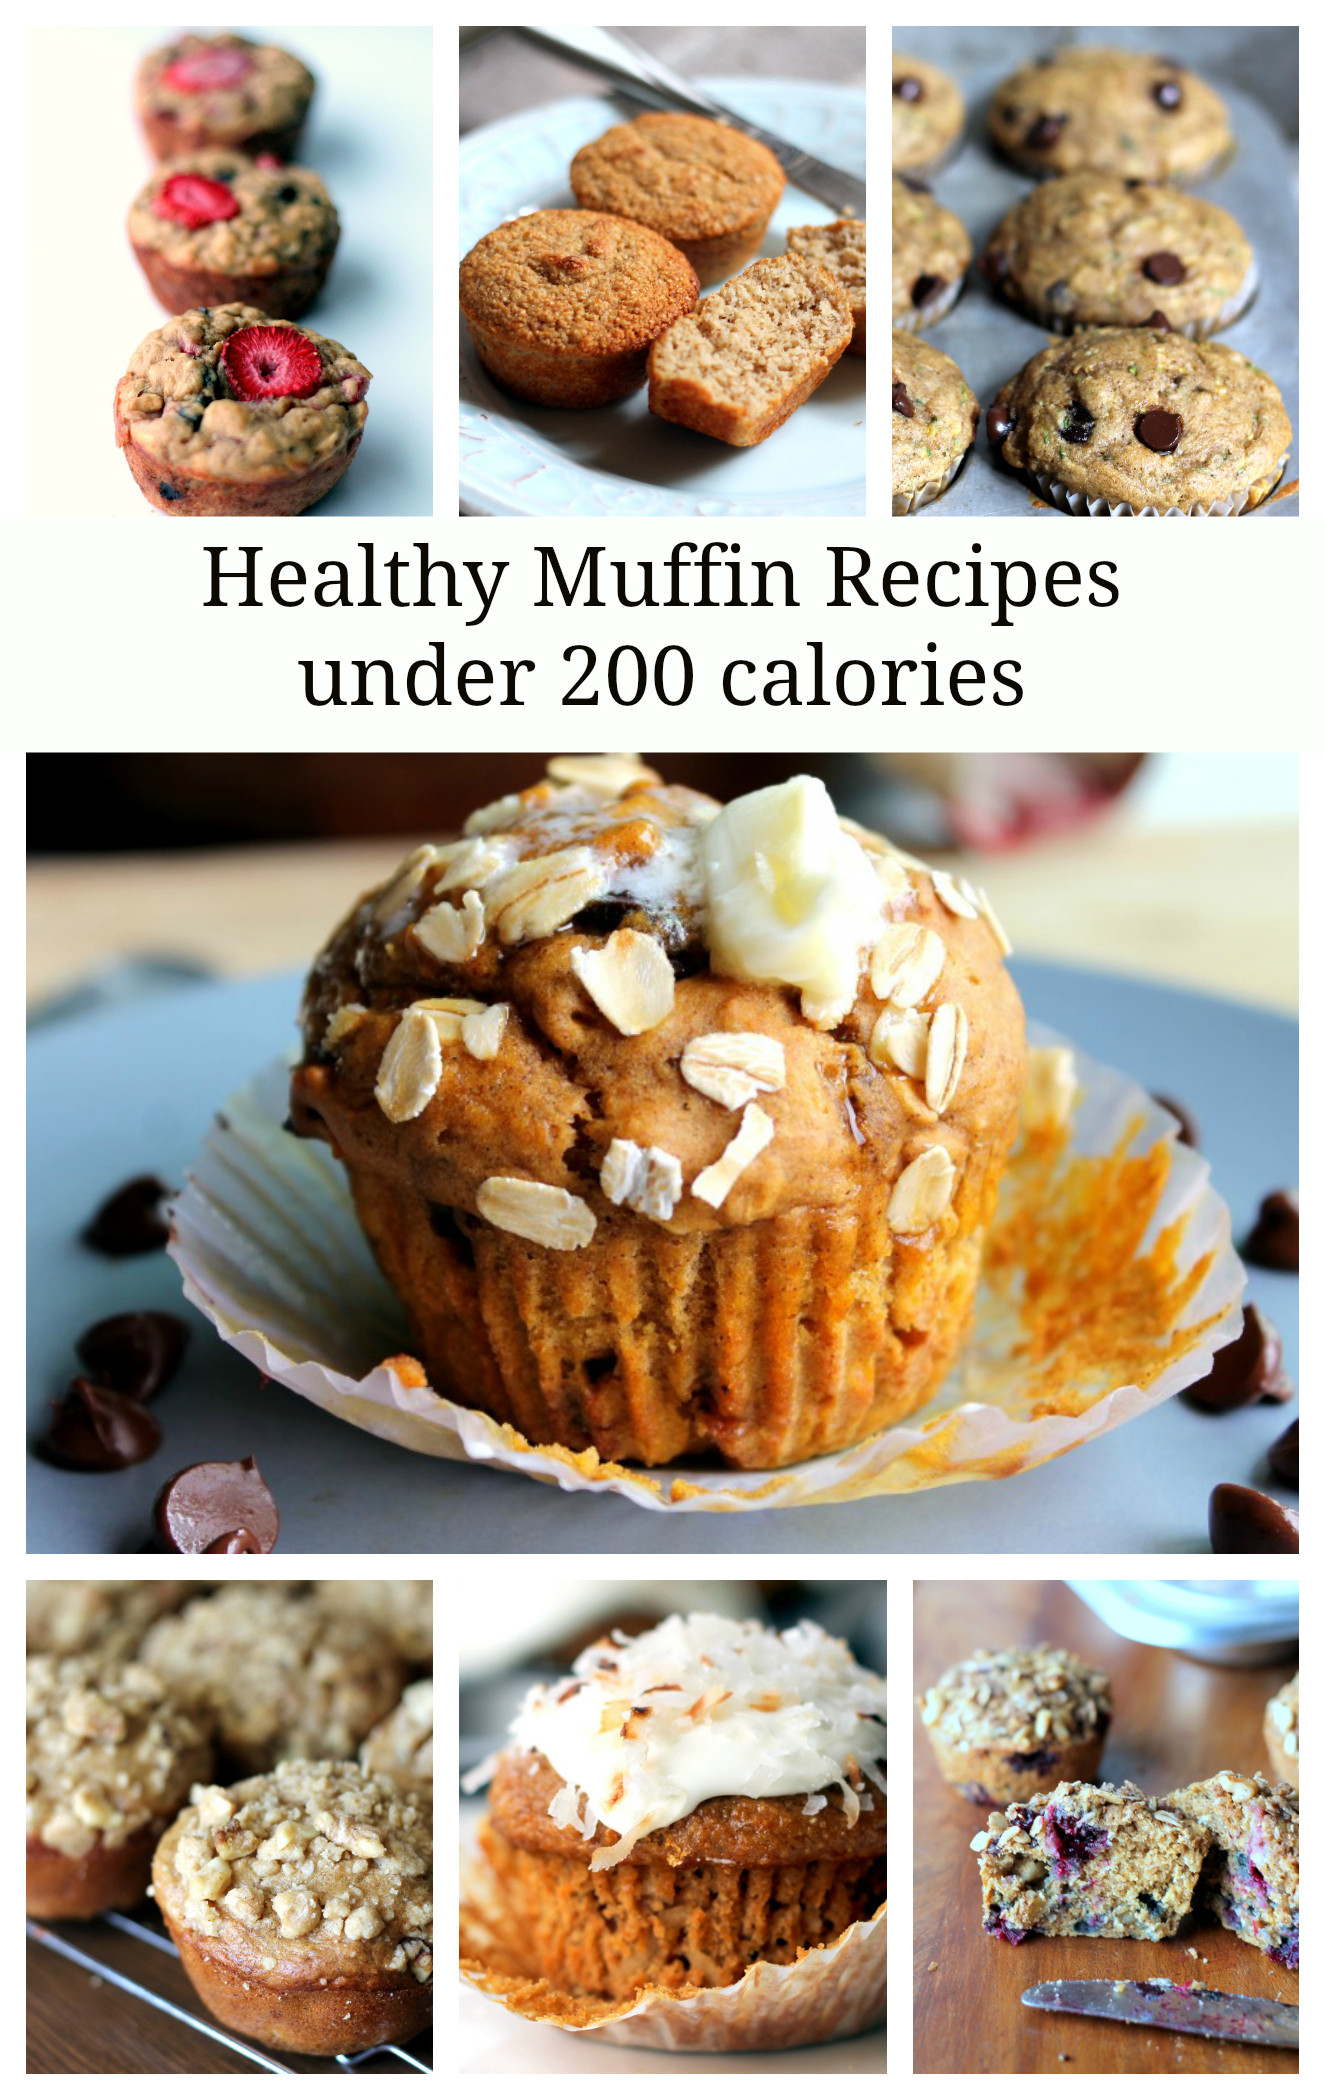 Healthy Breakfast Muffins Recipe
 7 Healthy Muffin Recipes Under 200 Calories